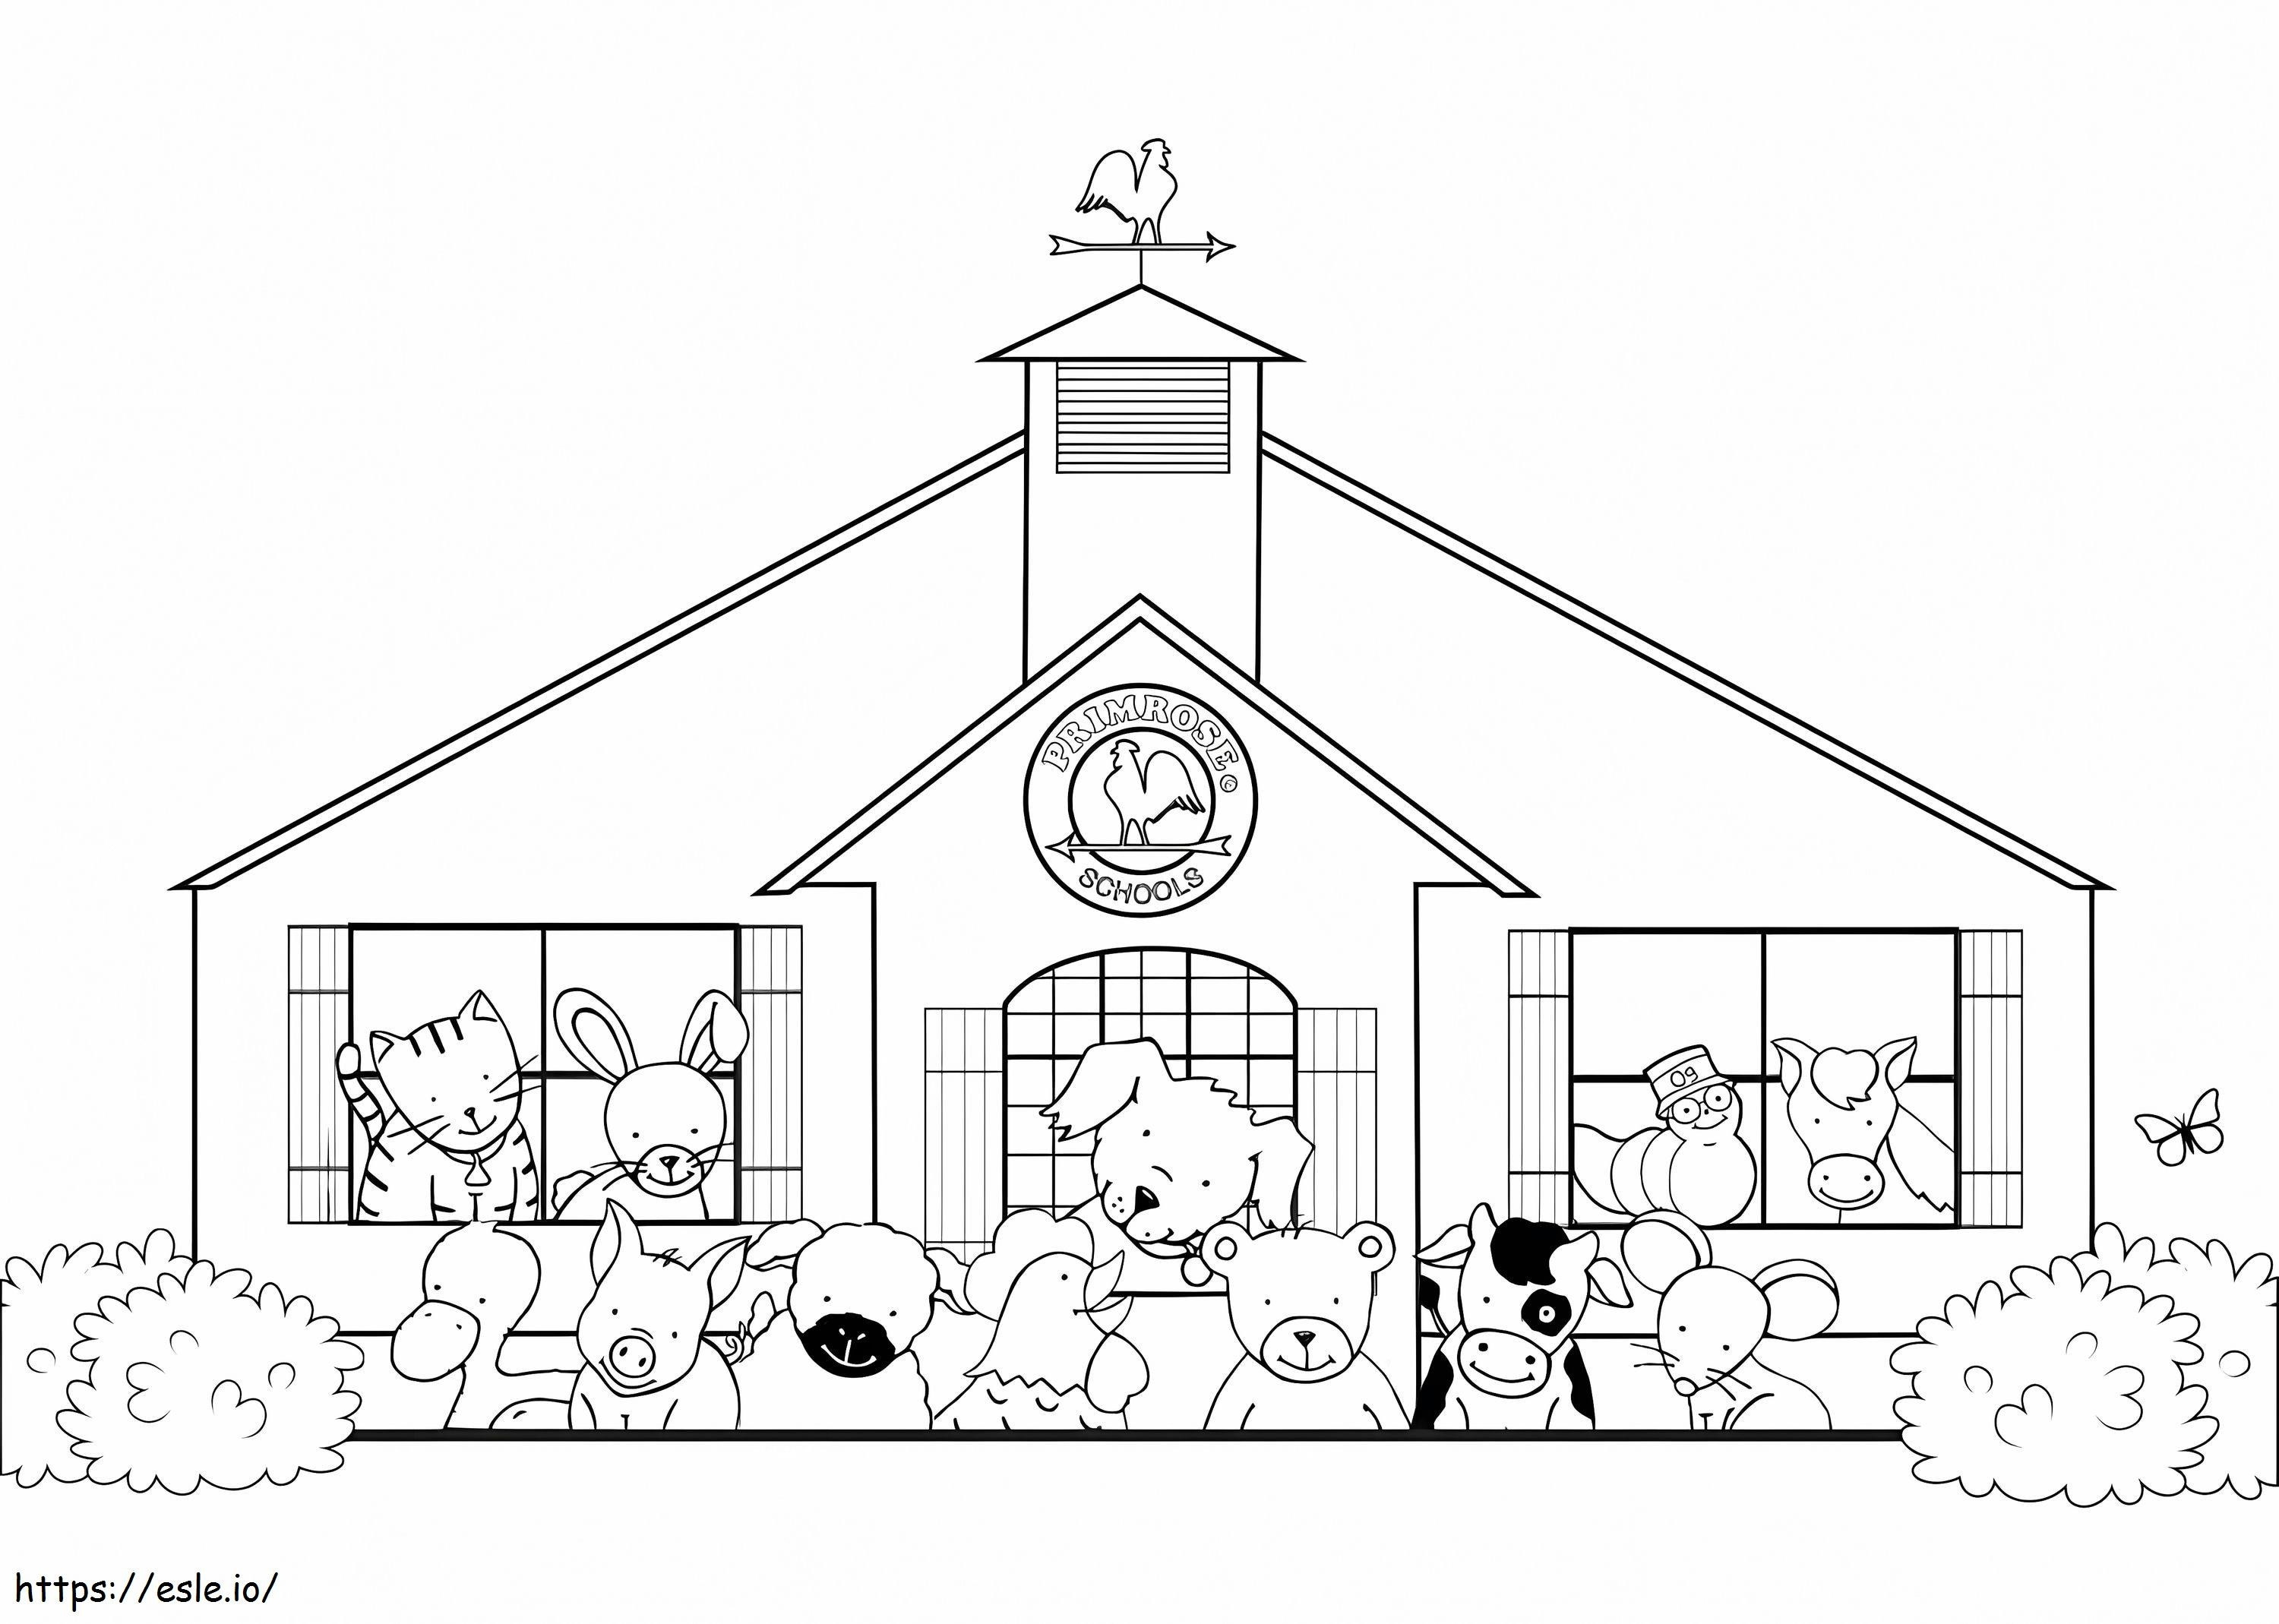 Animals At School coloring page